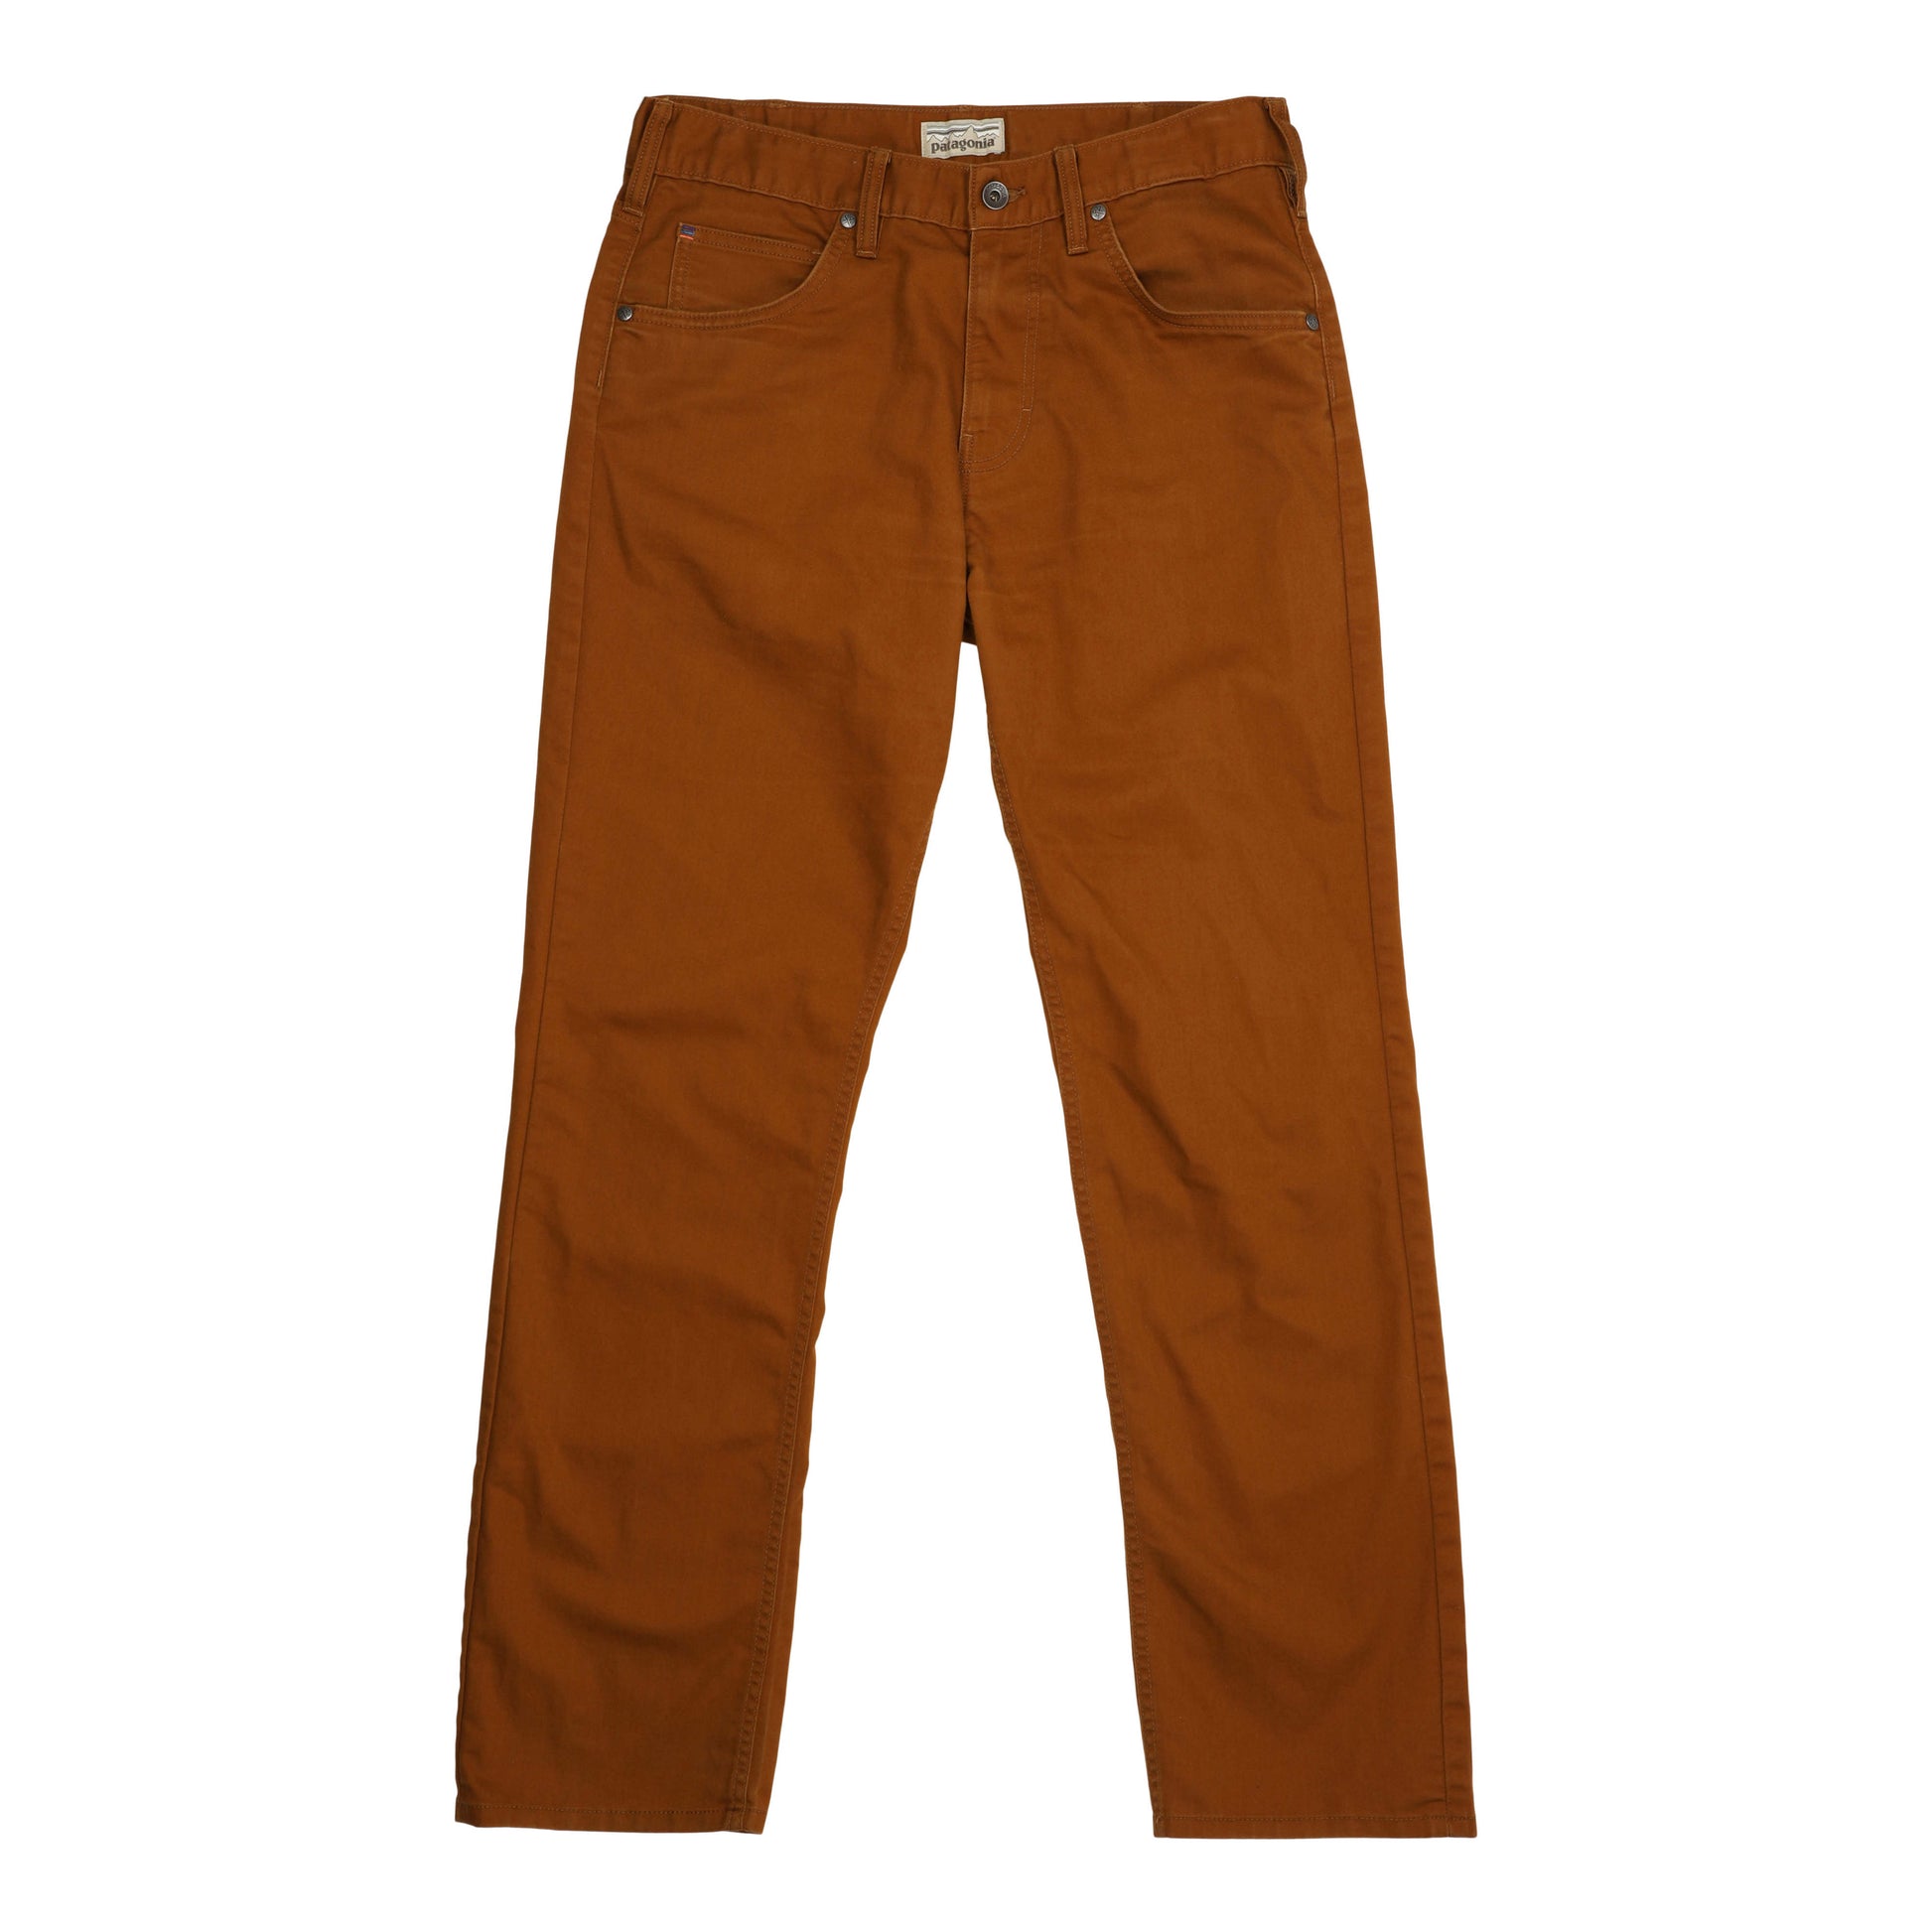 Performance Twill Jeans - Regular - Men's by Patagonia Online